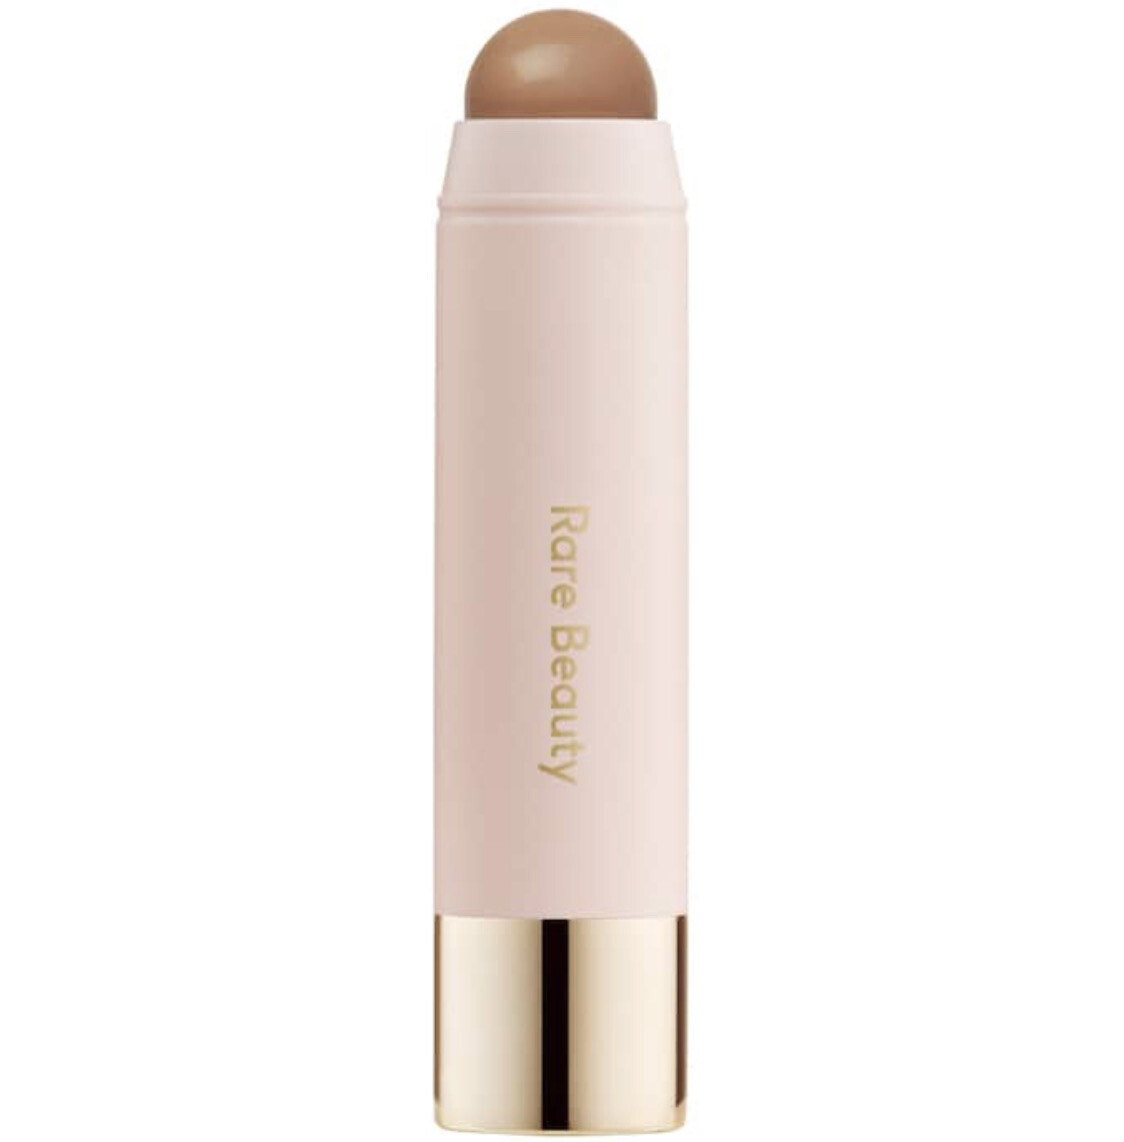 Rare Beauty by Selena Gomez - Warm Wishes Effortless Bronzer Sticks | Happy Sol - light brown with cool undertones